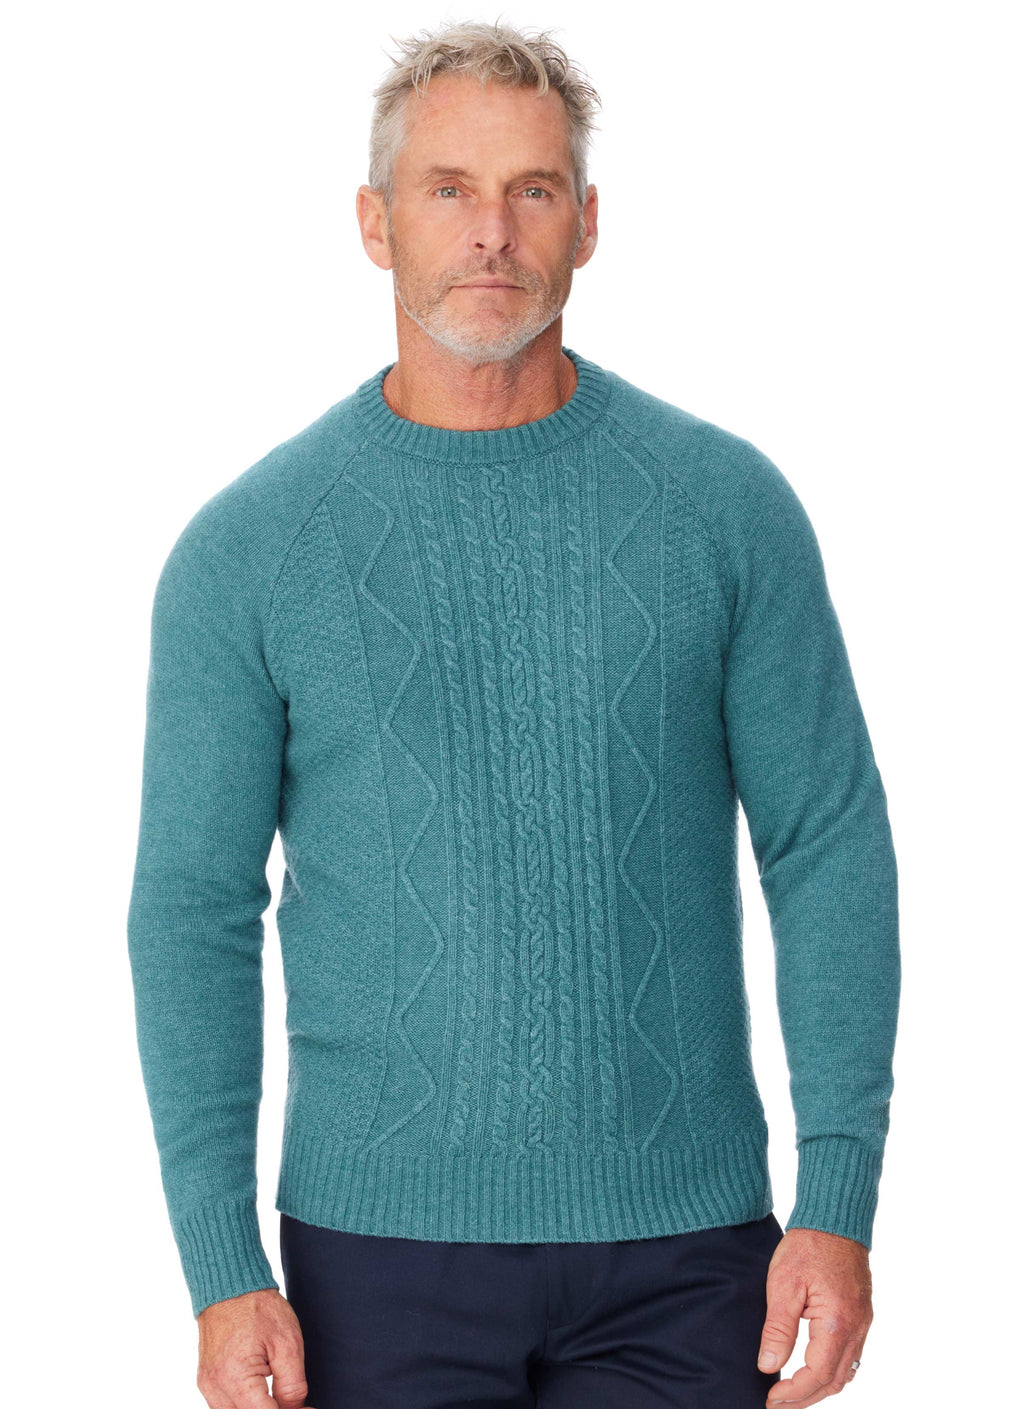 COLEBROOK CREW NECK CABLE - TEAL